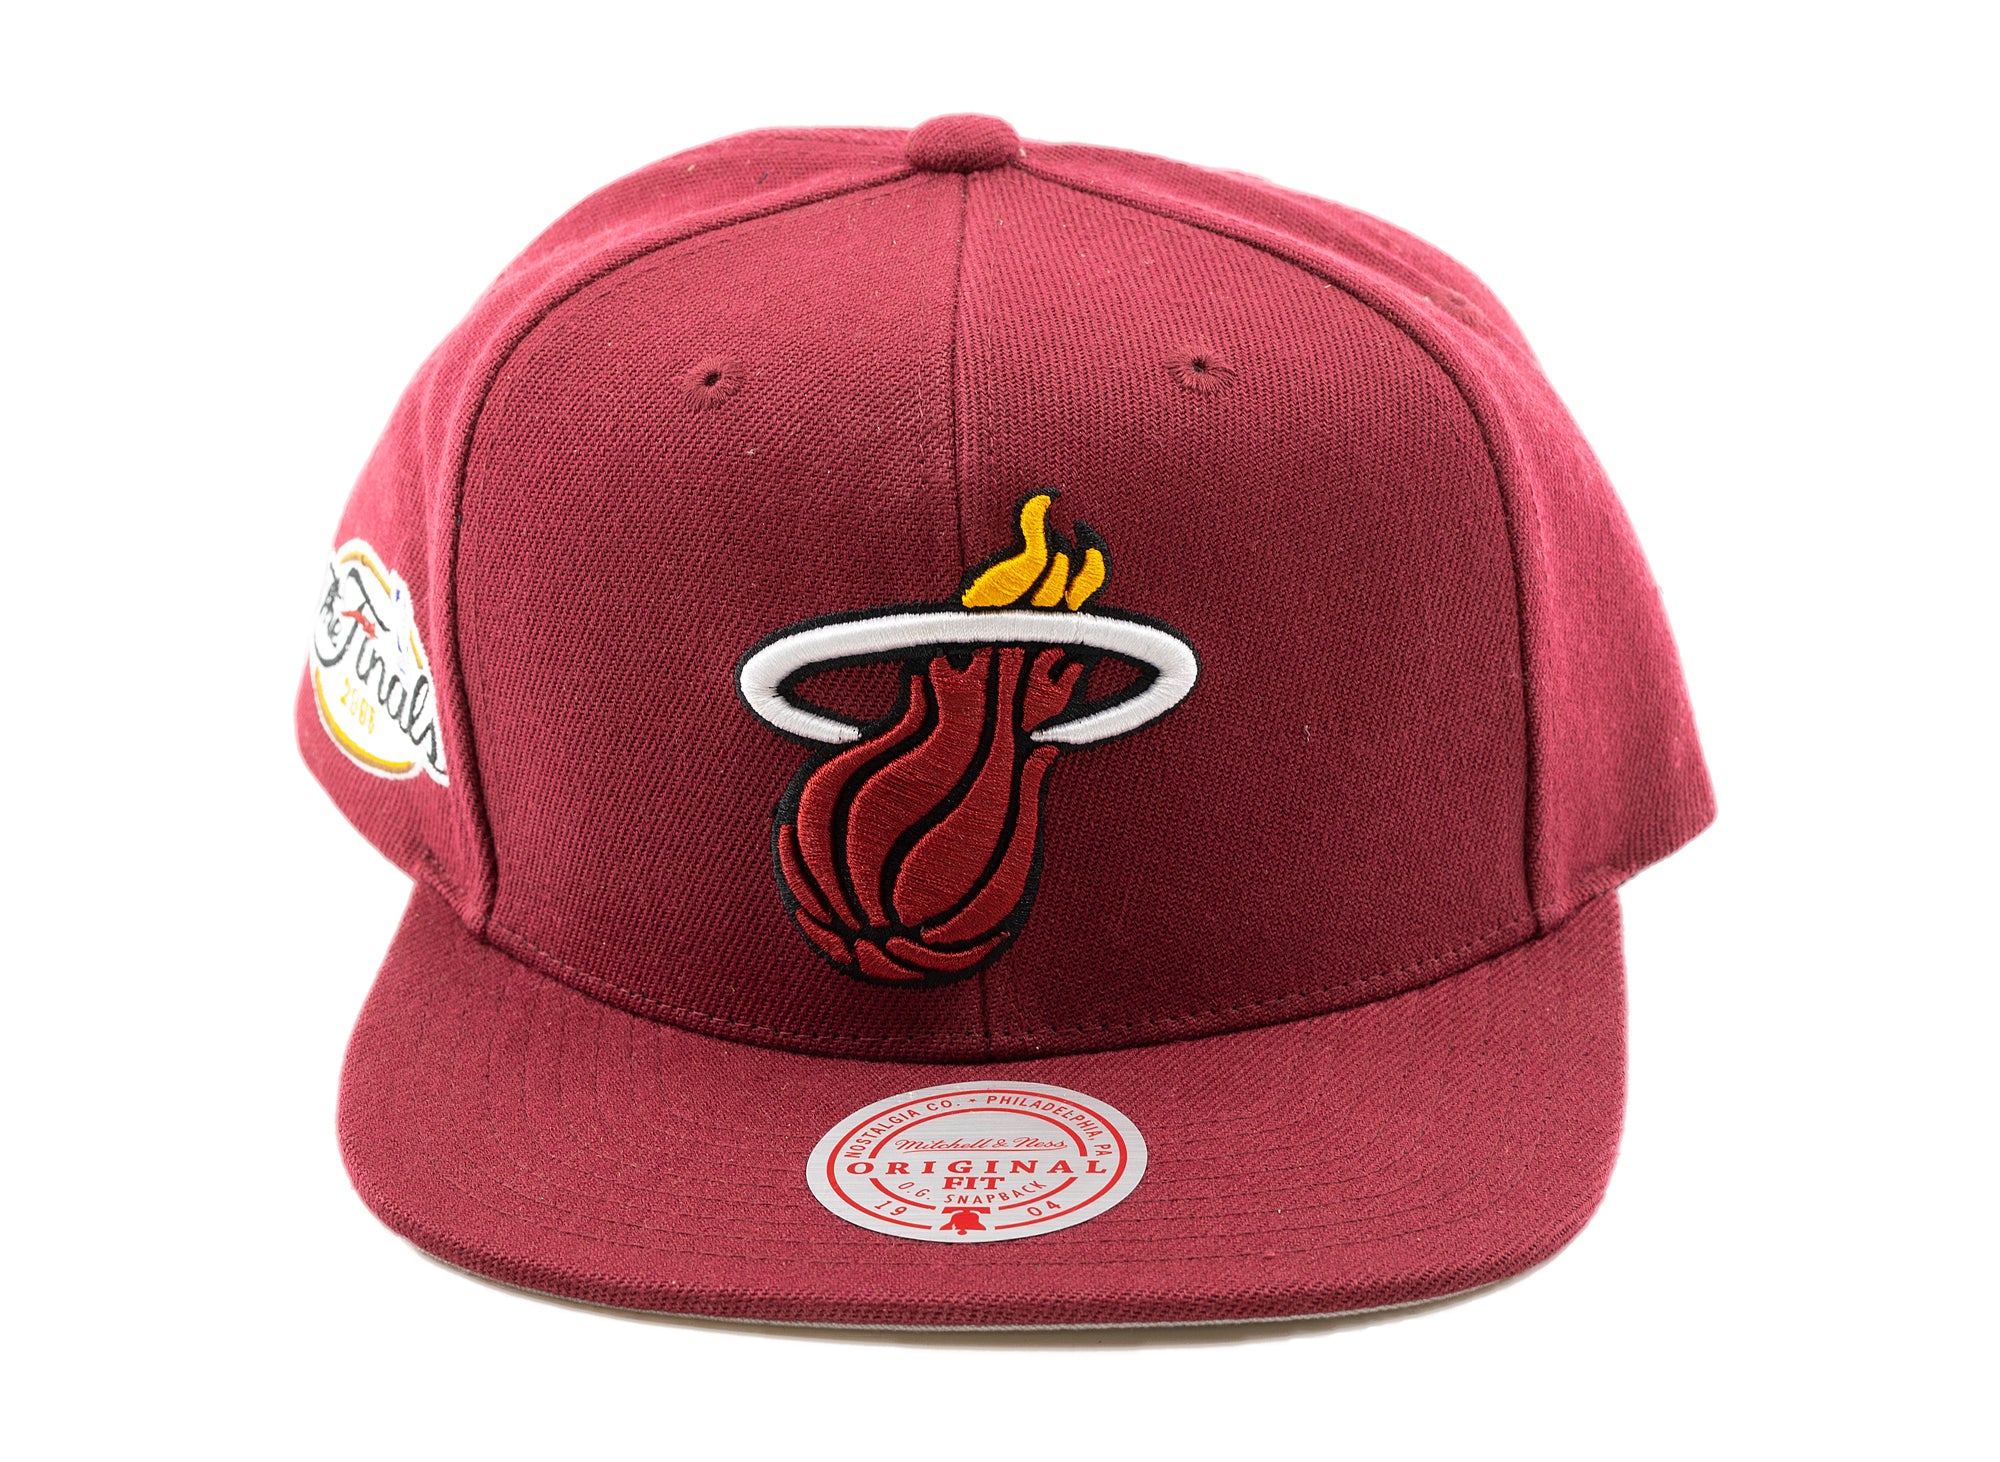 Miami Heat With Love Hwc Red Snapback - Mitchell & Ness cap